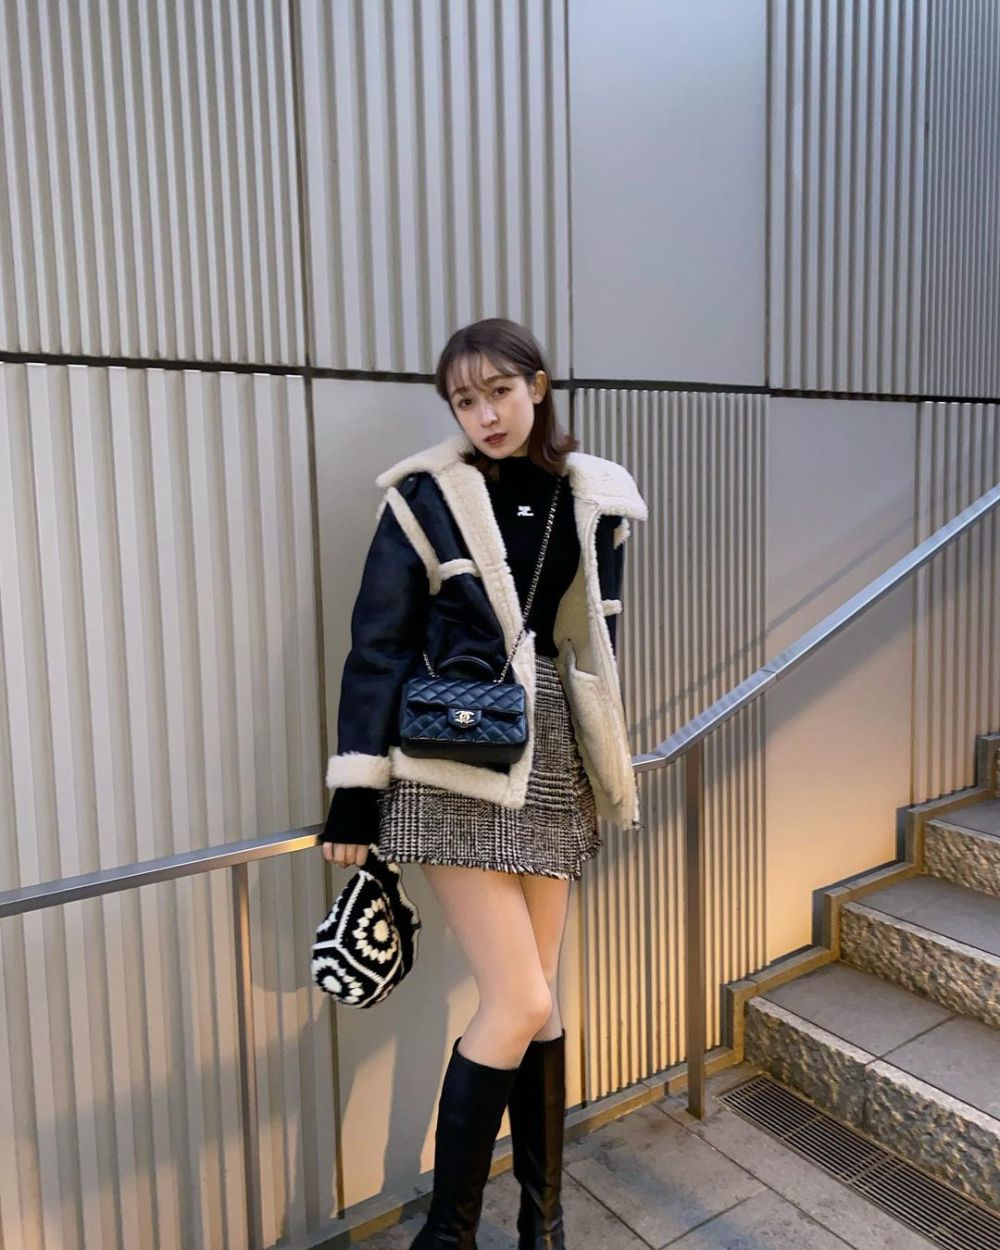 7 Ide Mix and Match Outfit ala Model Sachi Fujii, Gorgeous!